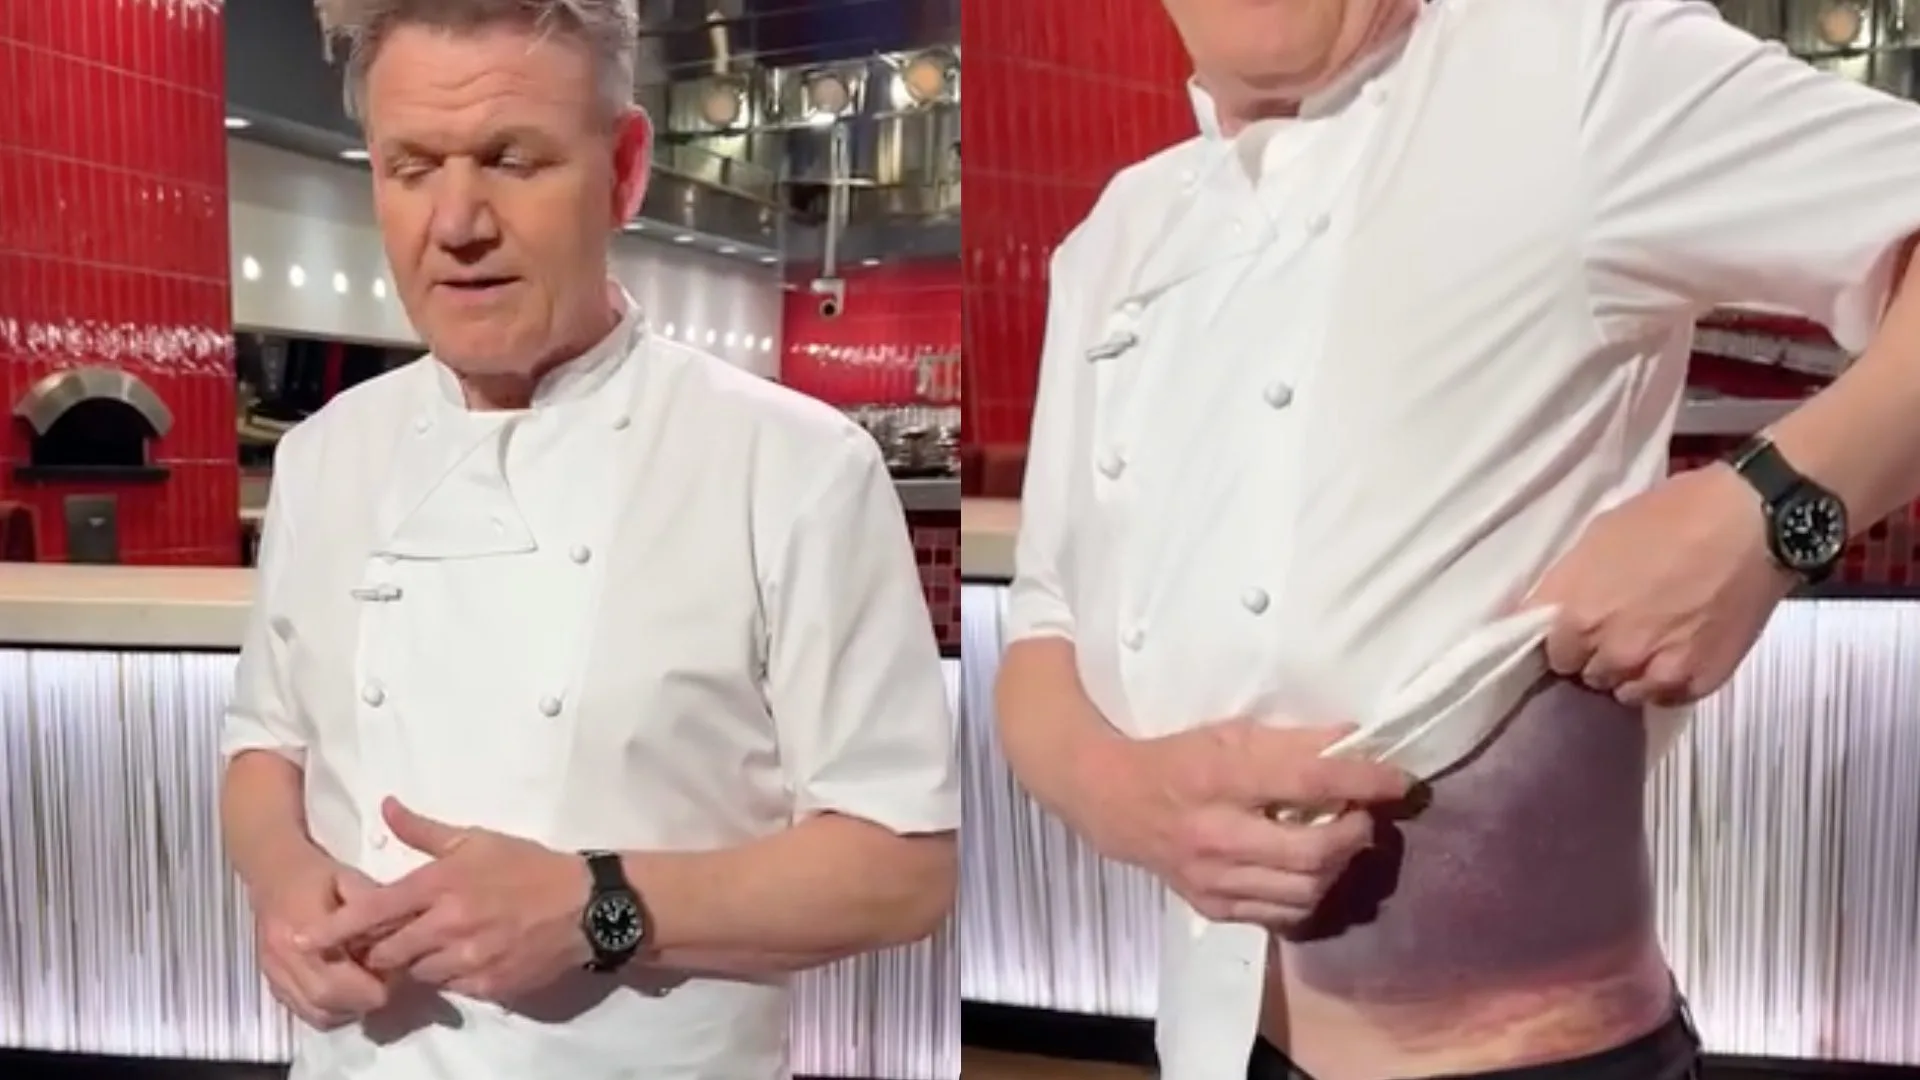 Gordon Ramsay "Lucky to be here" after hefty crash